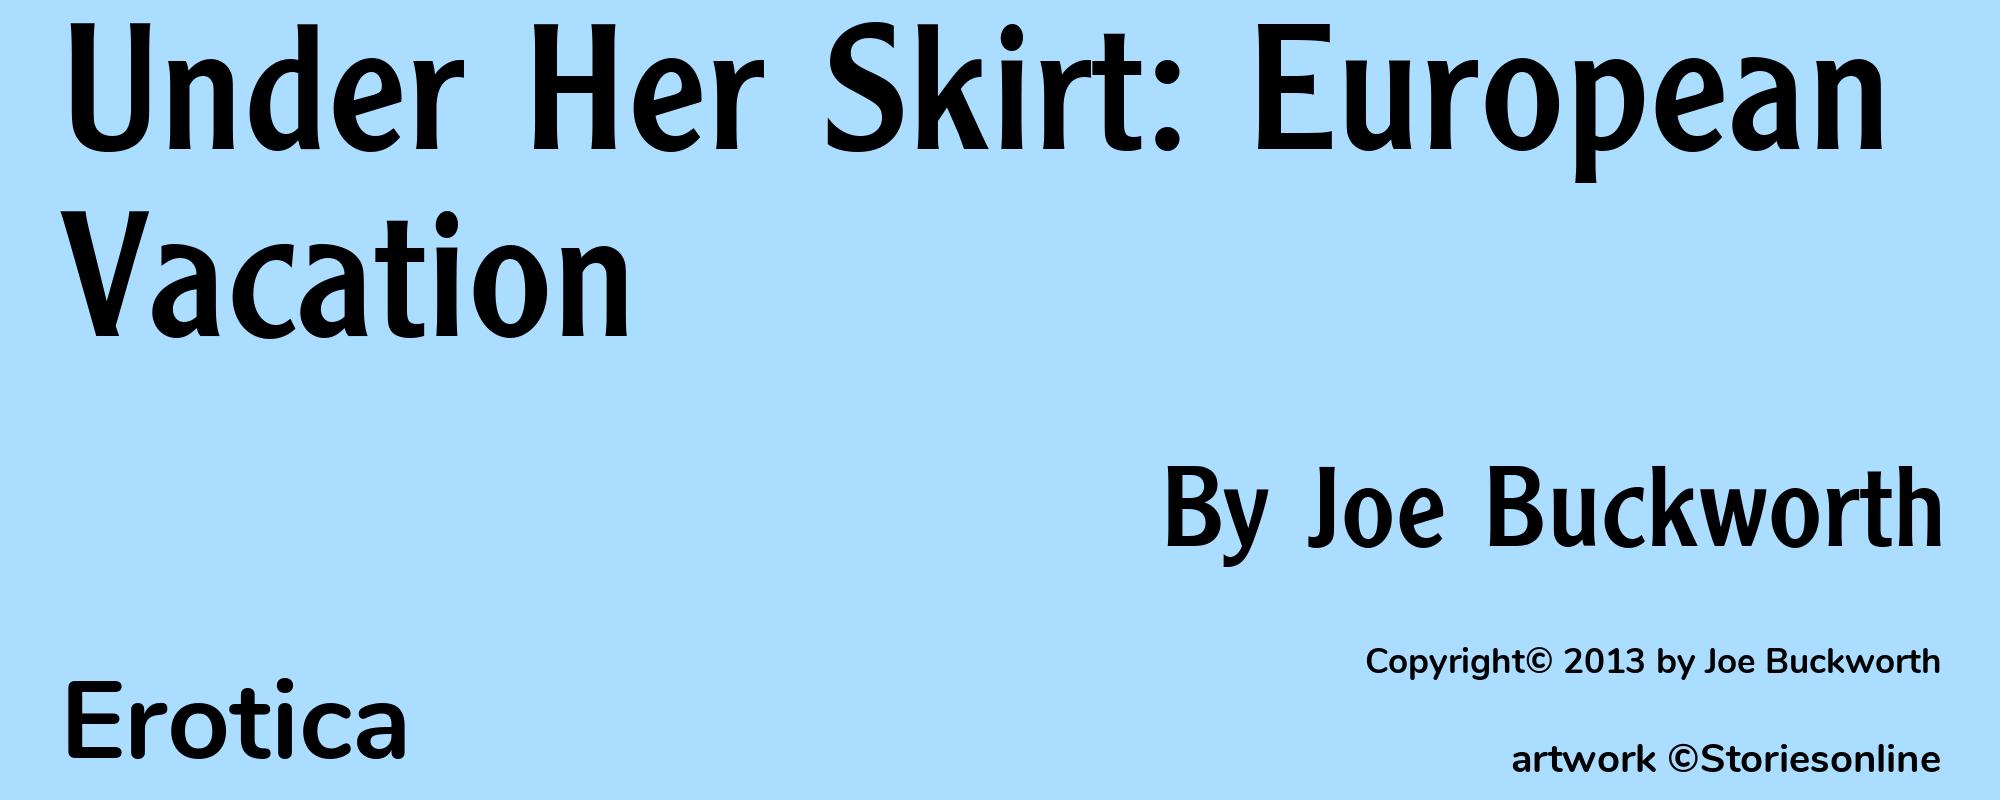 Under Her Skirt: European Vacation - Cover